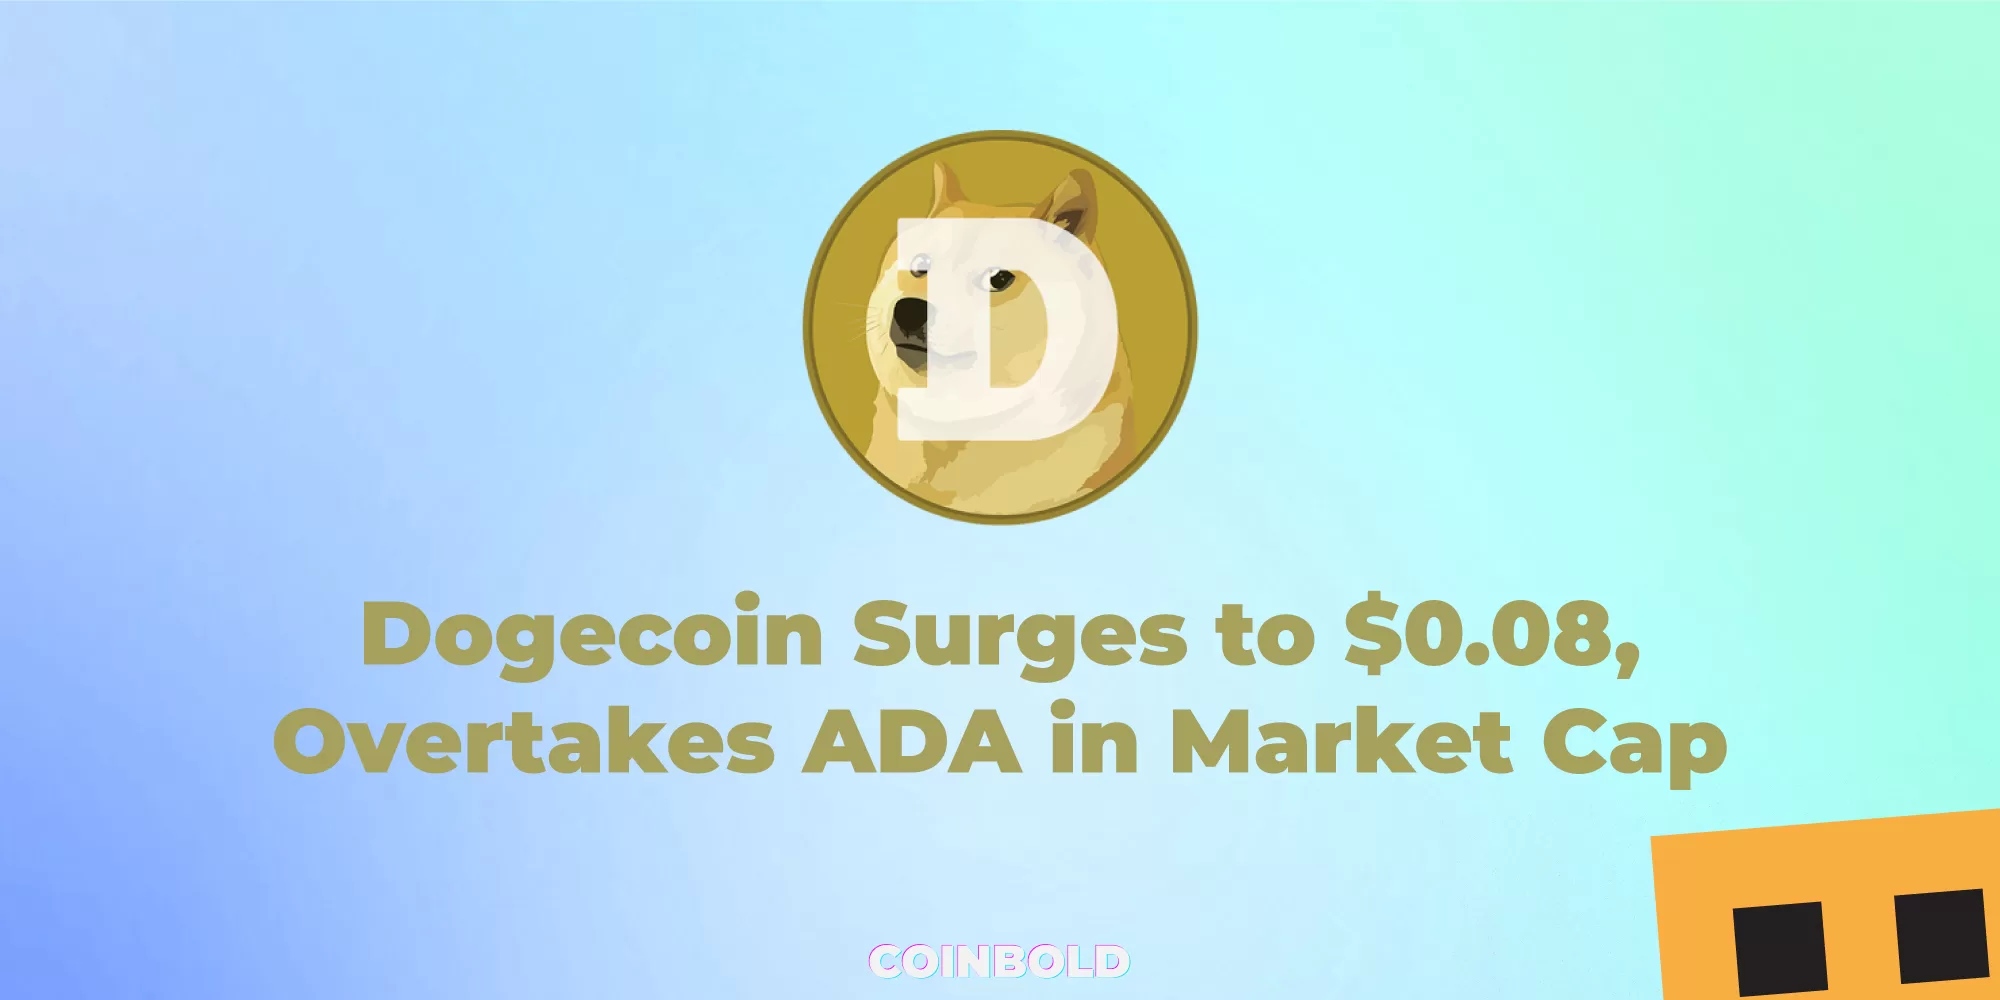 Dogecoin Surges to $0.08, Overtakes ADA in Market Cap